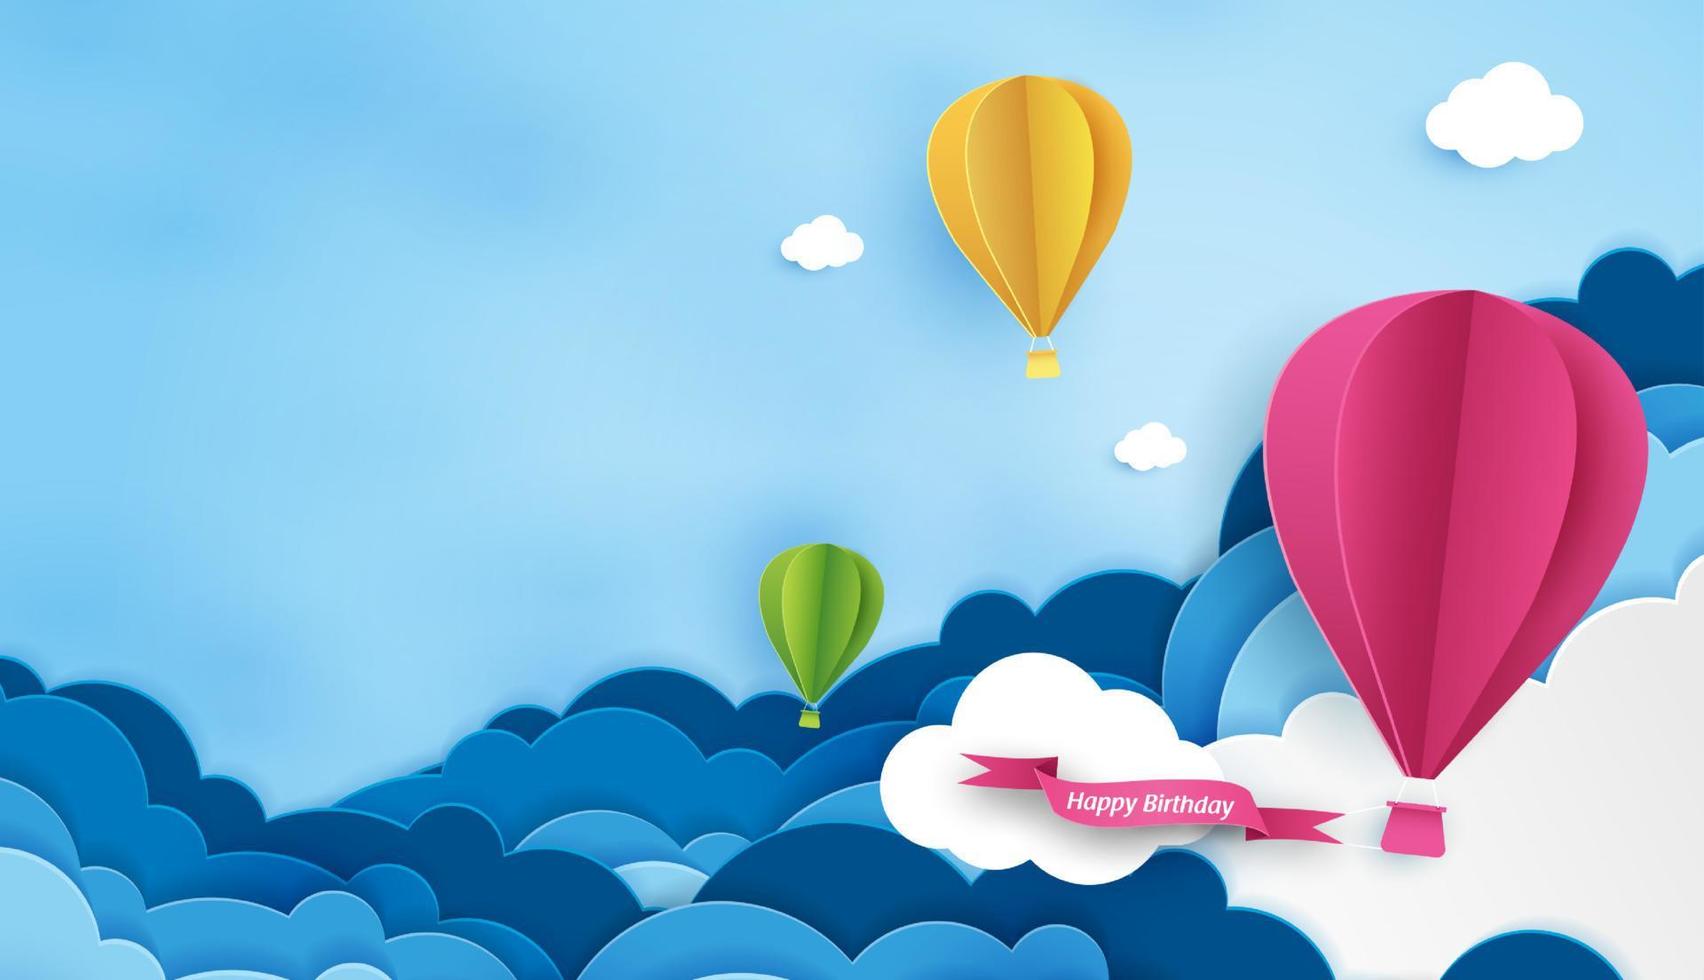 Paper art of birthday with balloon and cloud in the sky. can be used for Wallpaper, invitation, posters, banners. Vector design